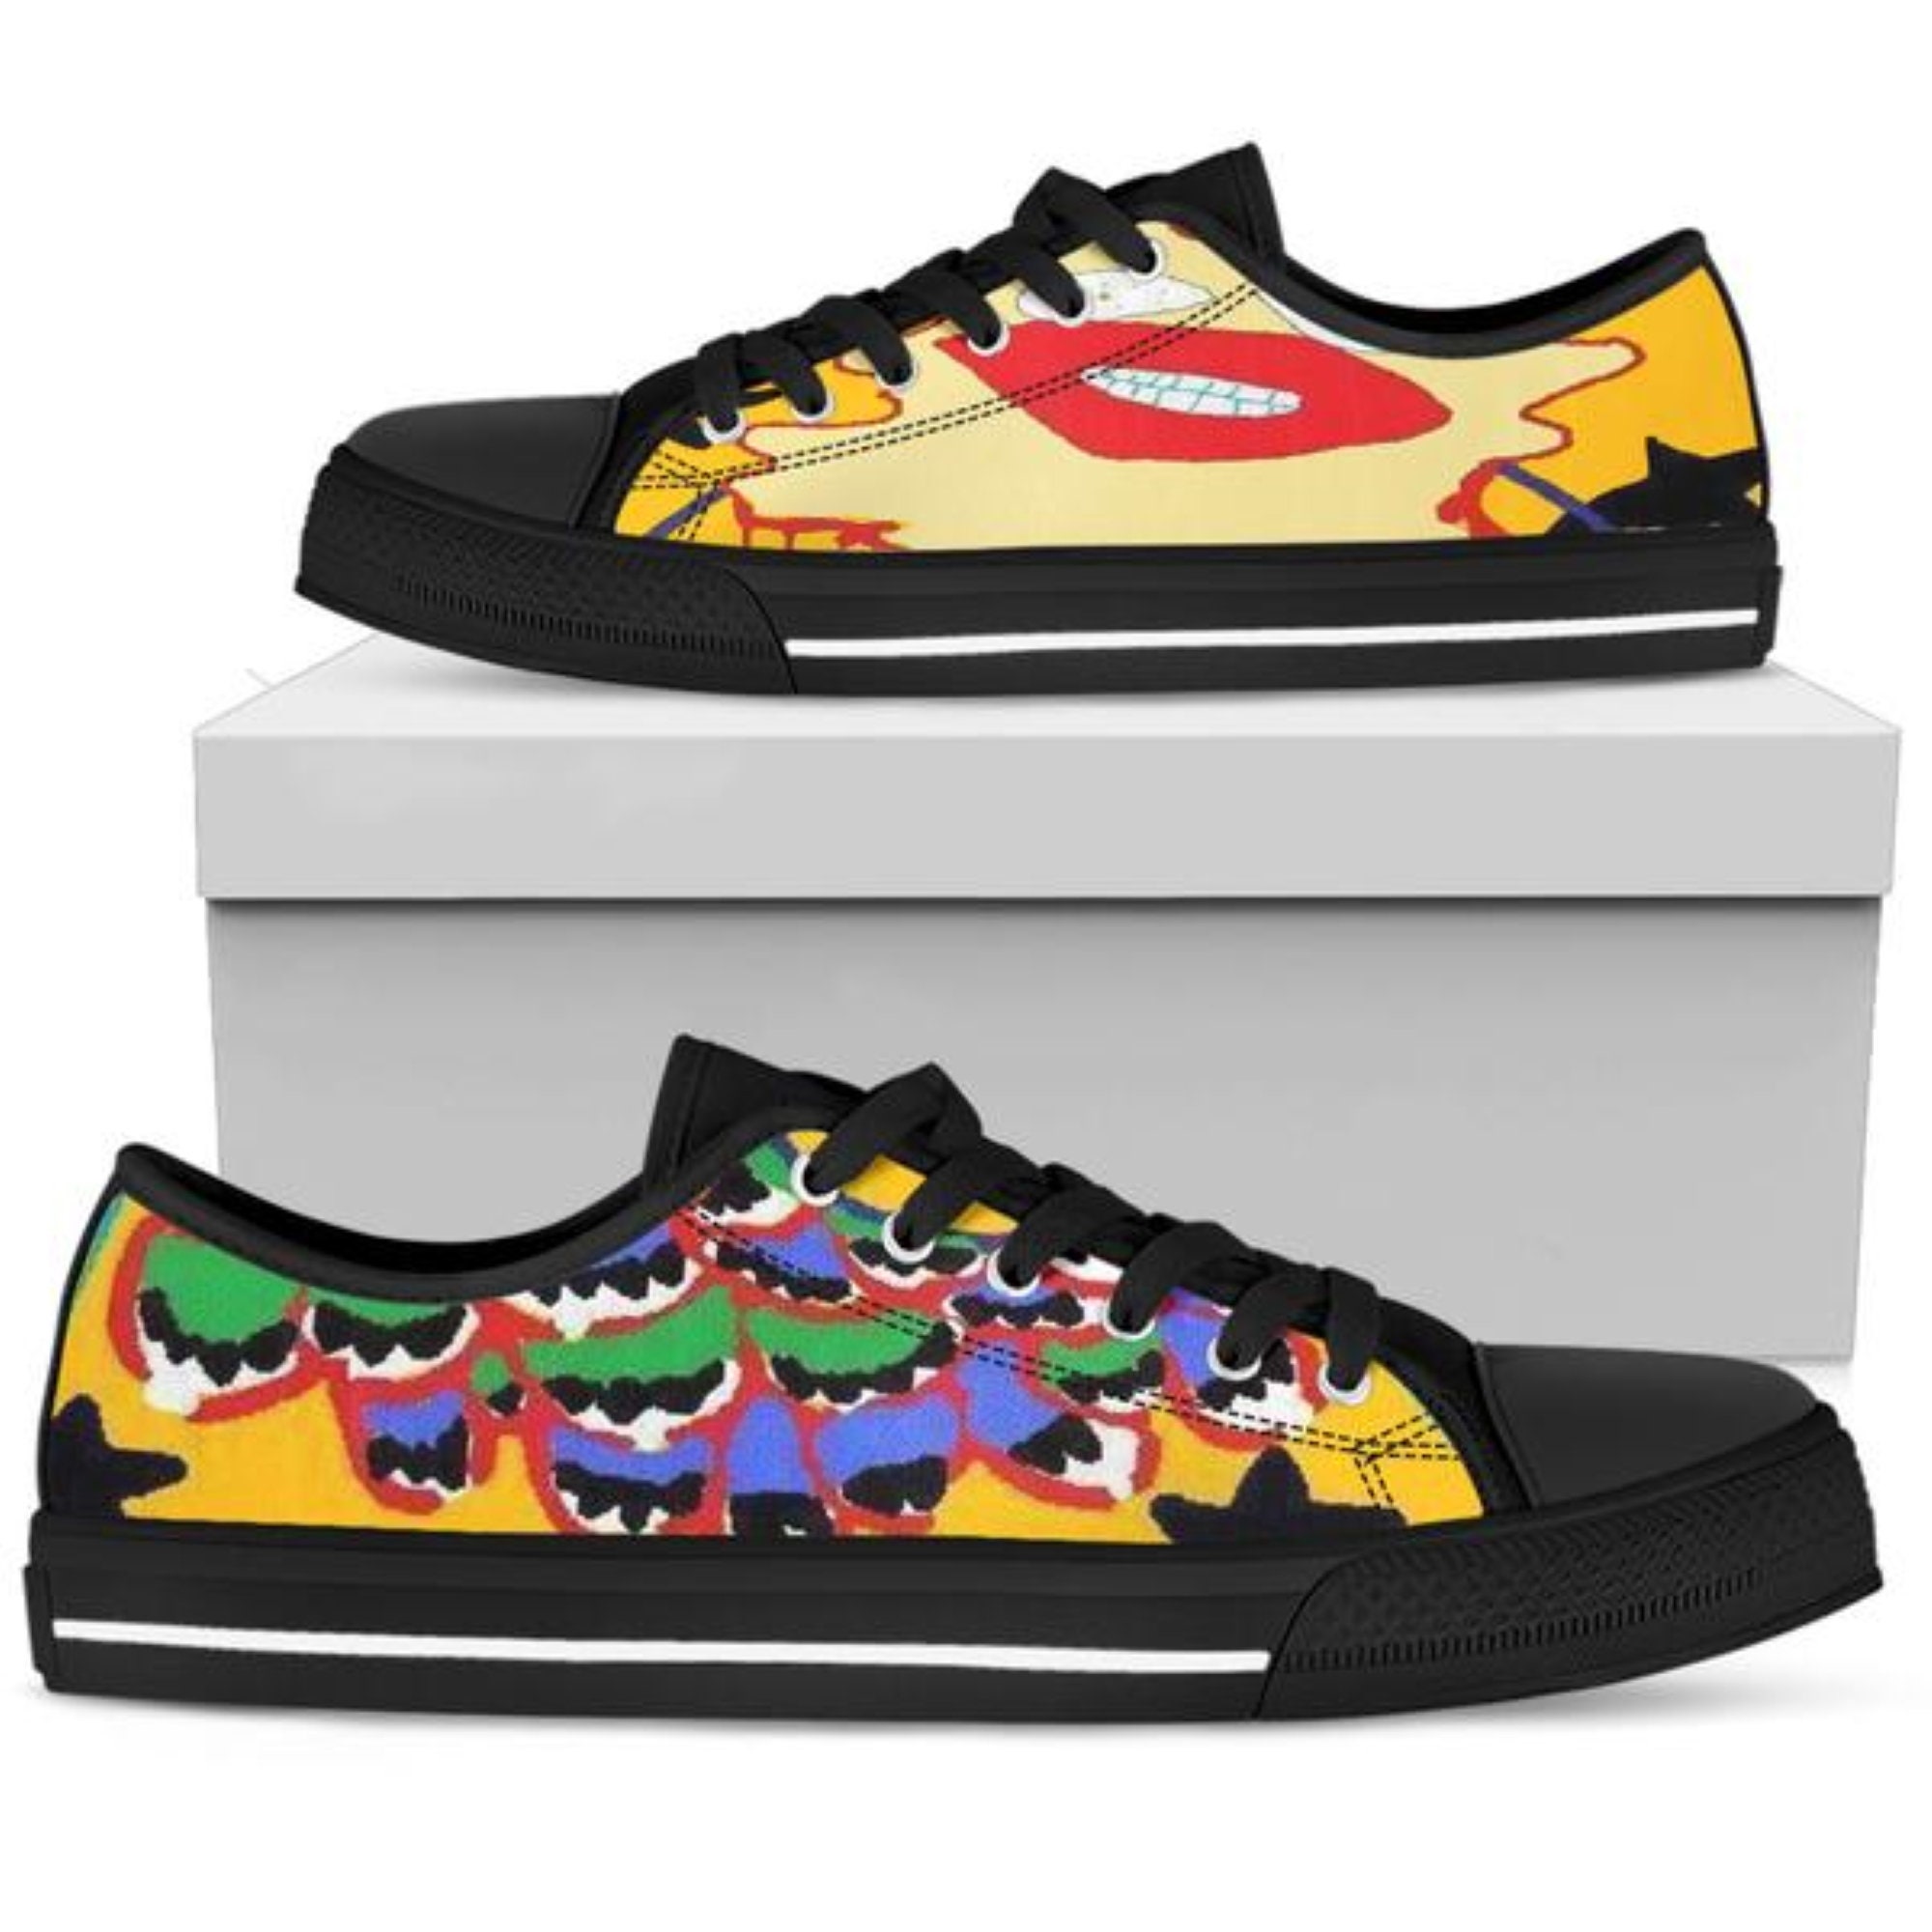 At sige sandheden Normalisering Ældre Pop Culture Sneakers Men's Customized Gifts Her Art - Etsy